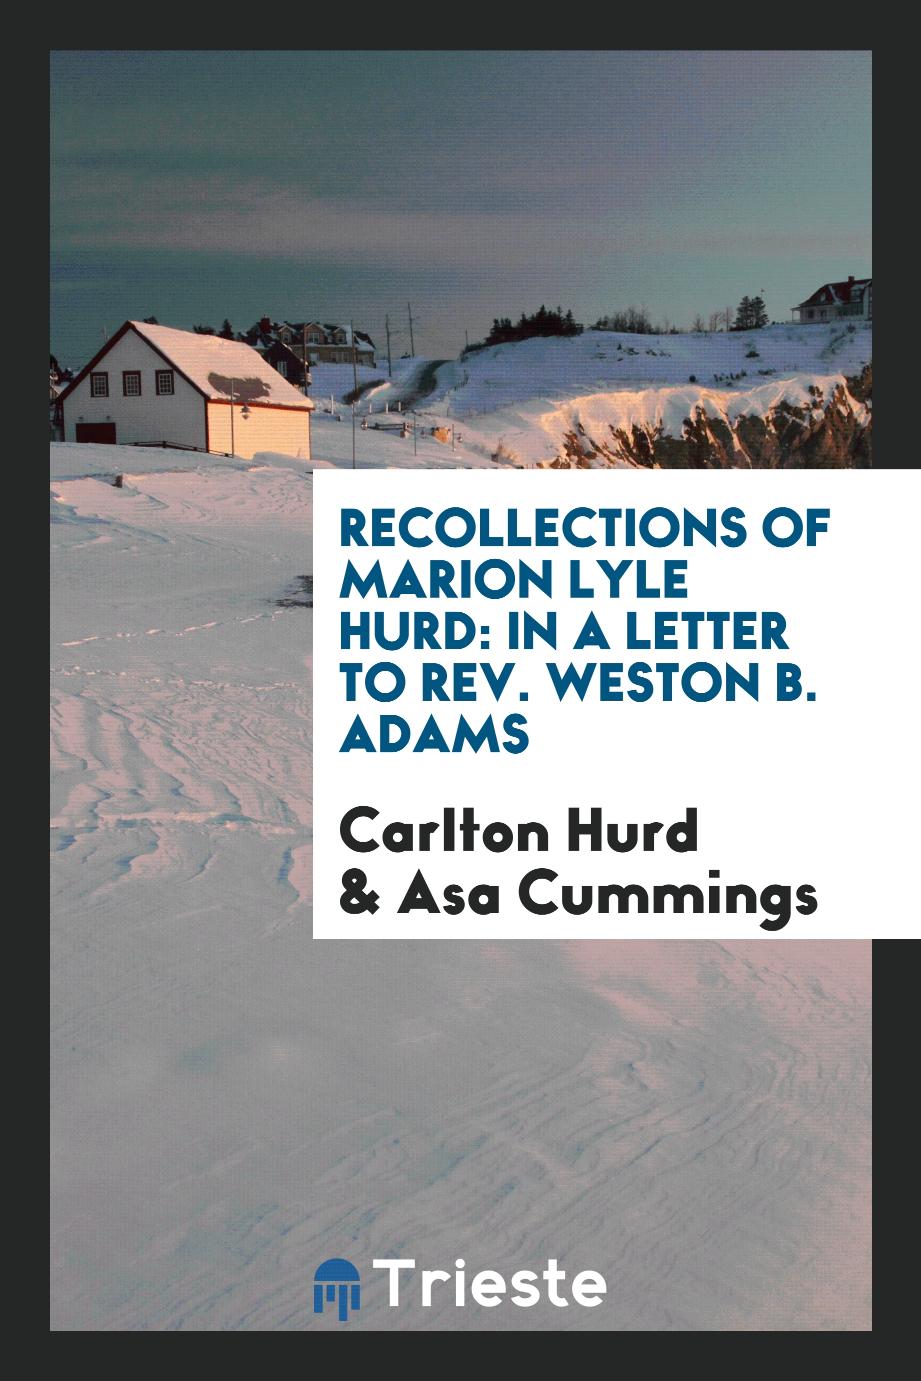 Recollections of Marion Lyle Hurd: in a letter to Rev. Weston B. Adams